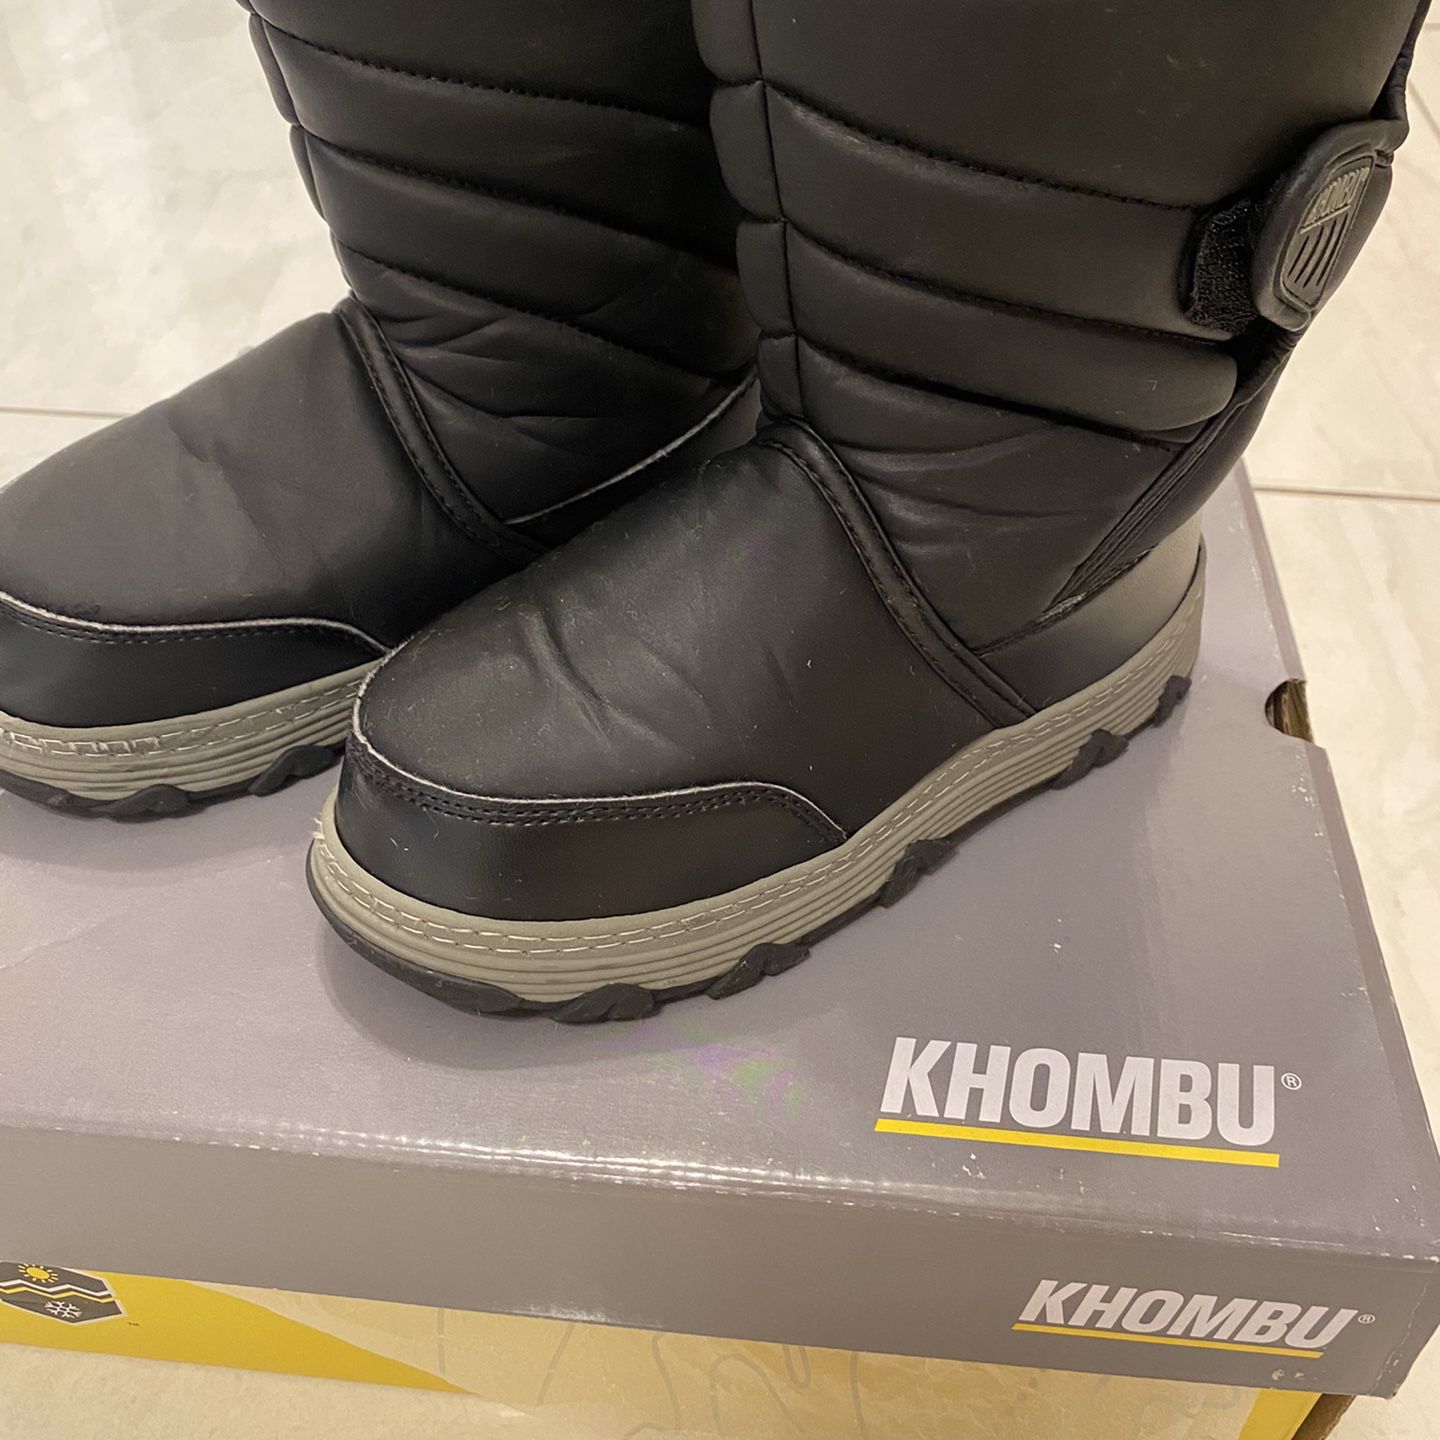 KHOMBU Warm Snow boots for Boys size Youth 1